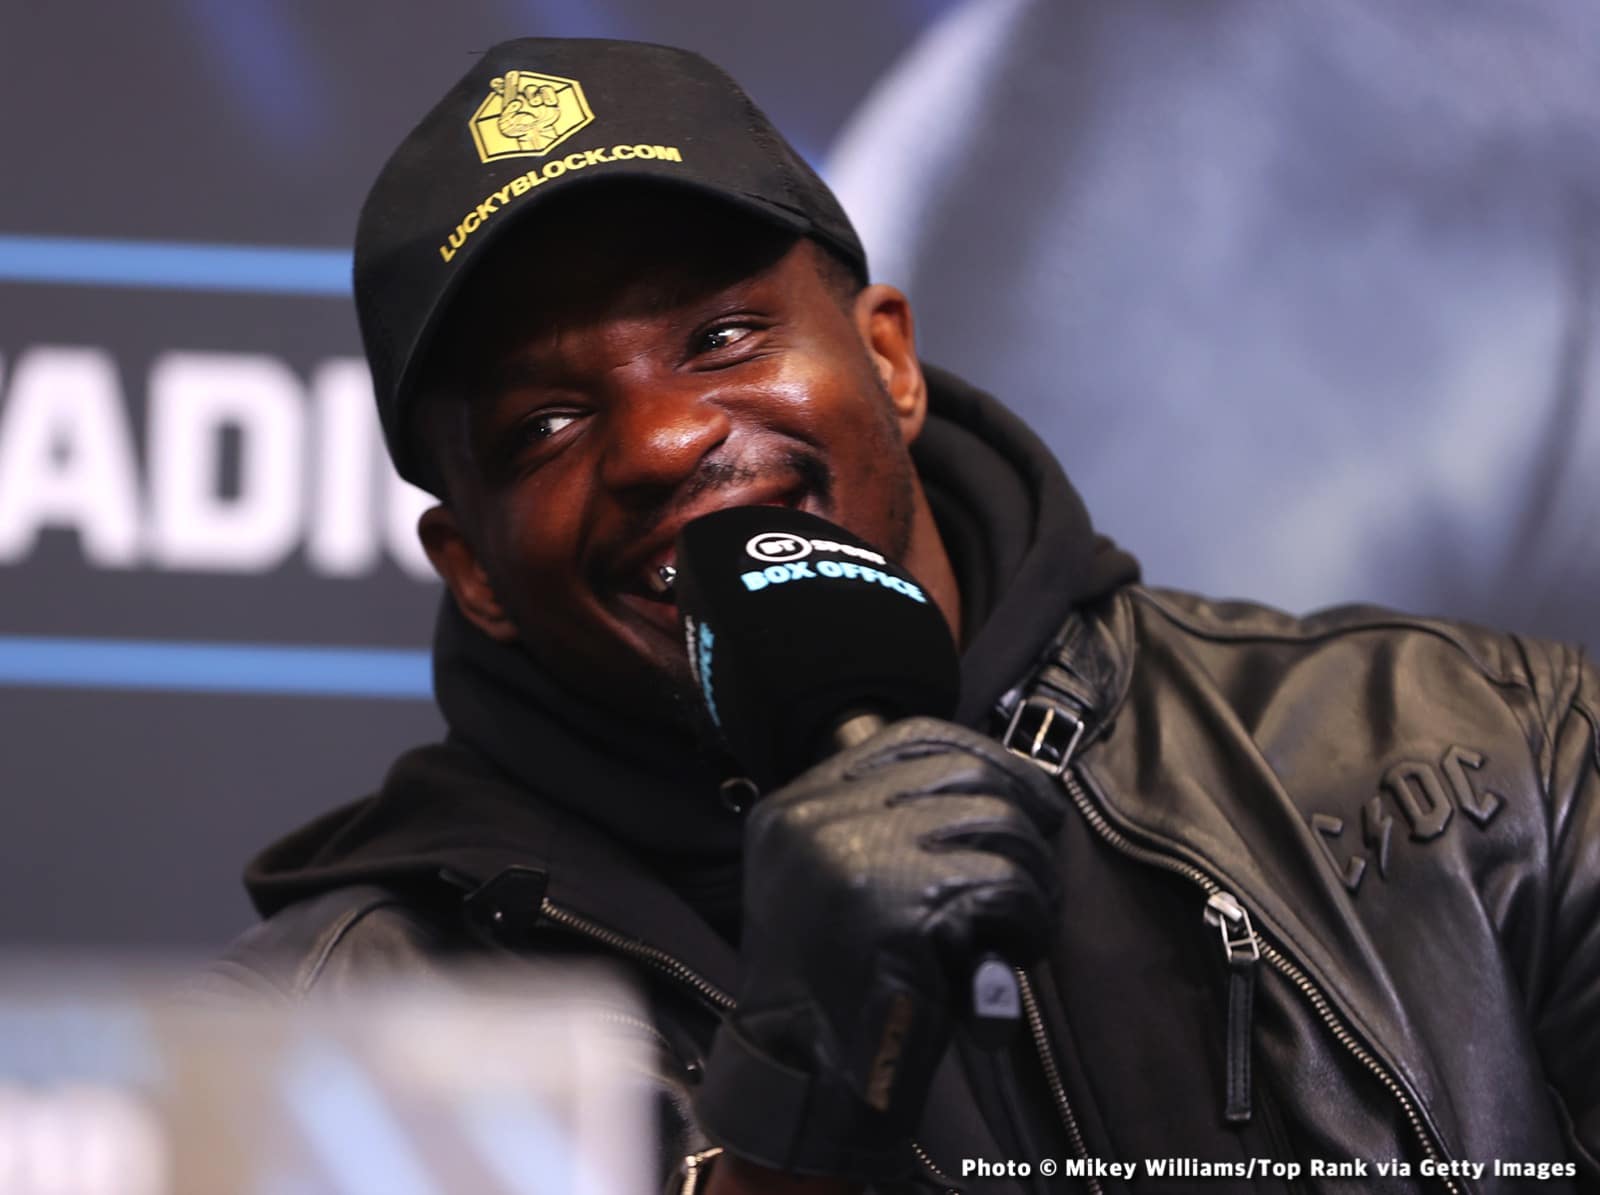 Dillian Whyte Likely To Face Jermain Franklin In November